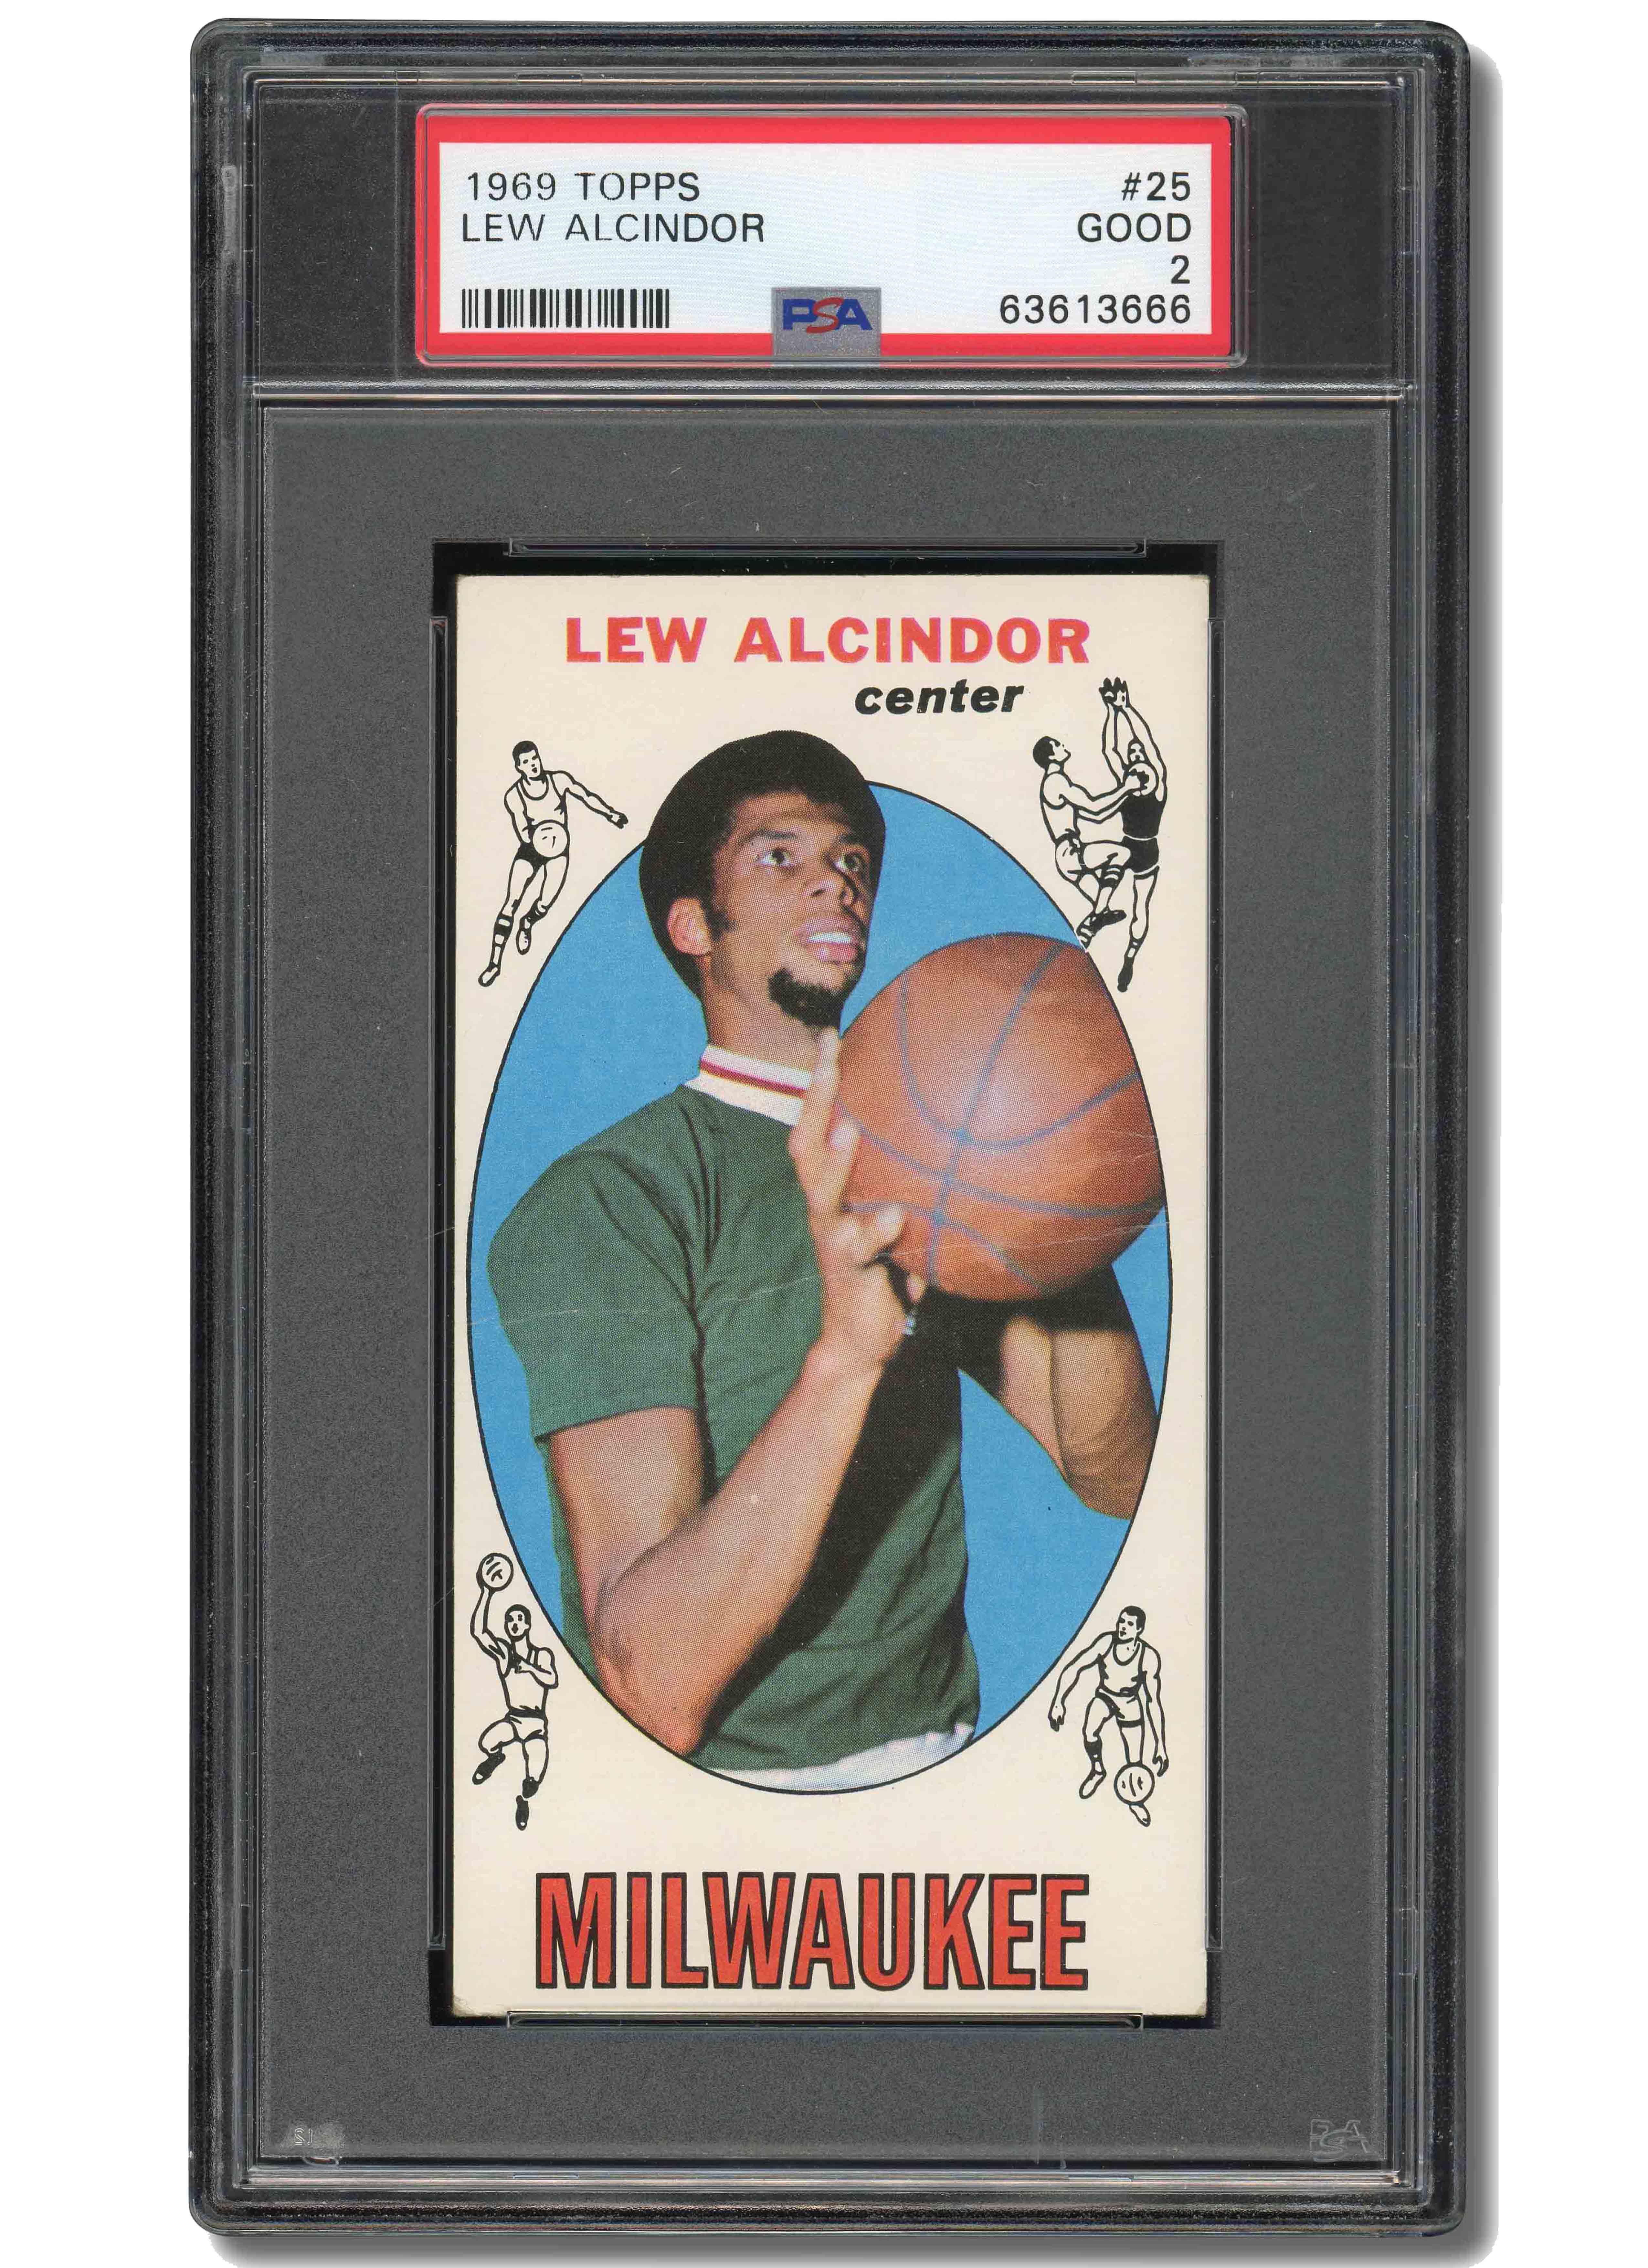 Sale of Lew Alcindor Jersey Sets New Auction Record